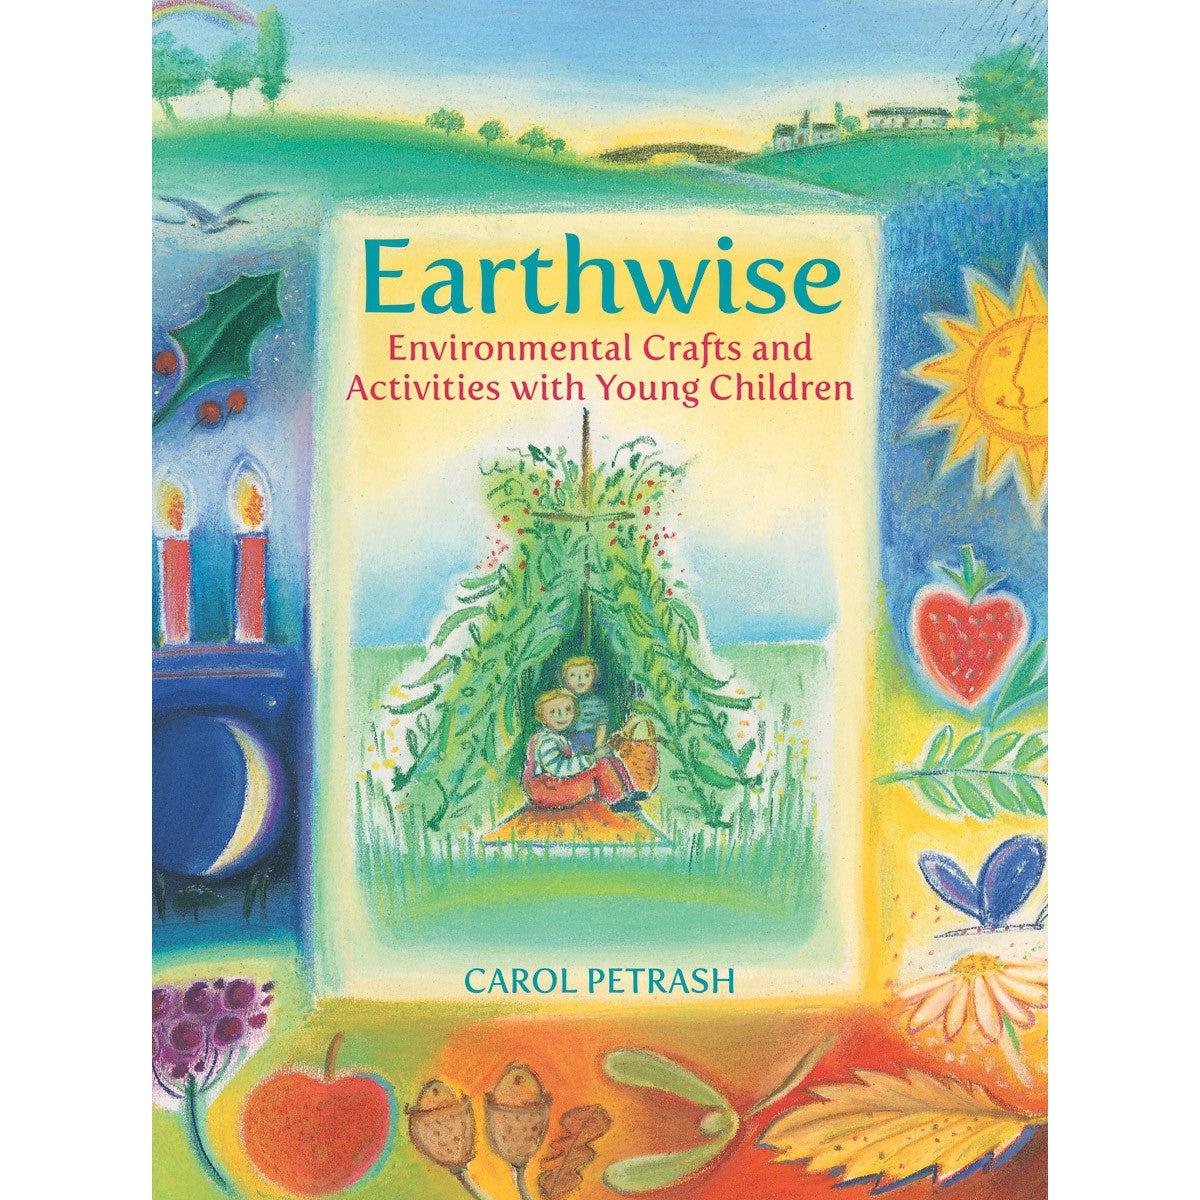 Earthwise: Environmental Crafts And Activities With Young Children